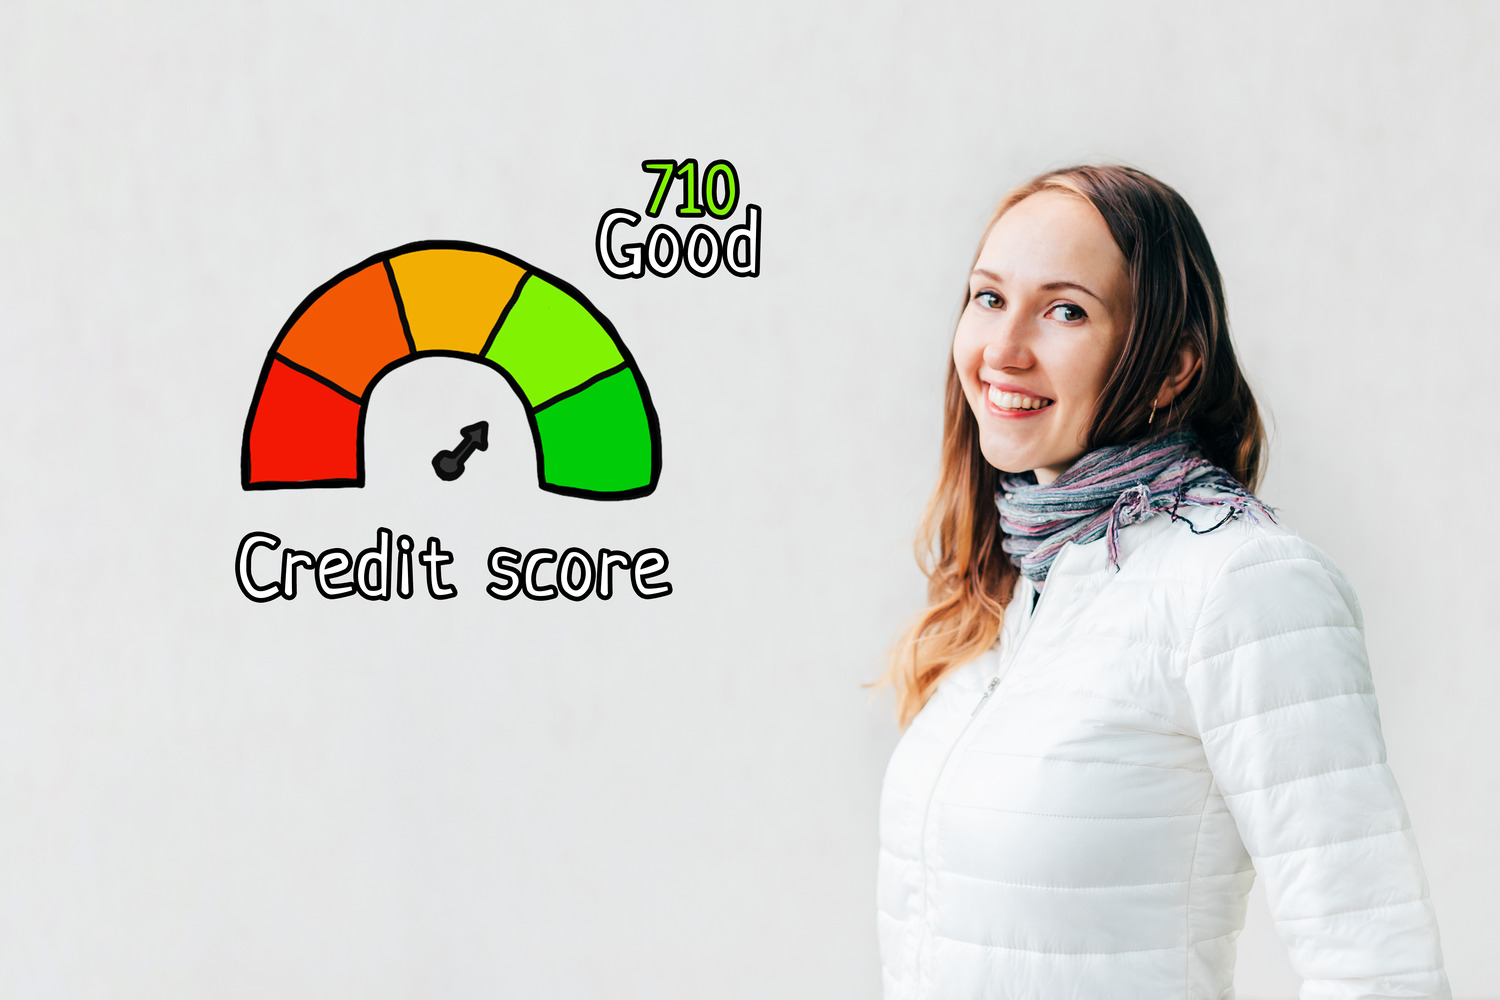 Applying for a credit card without hurting credit score